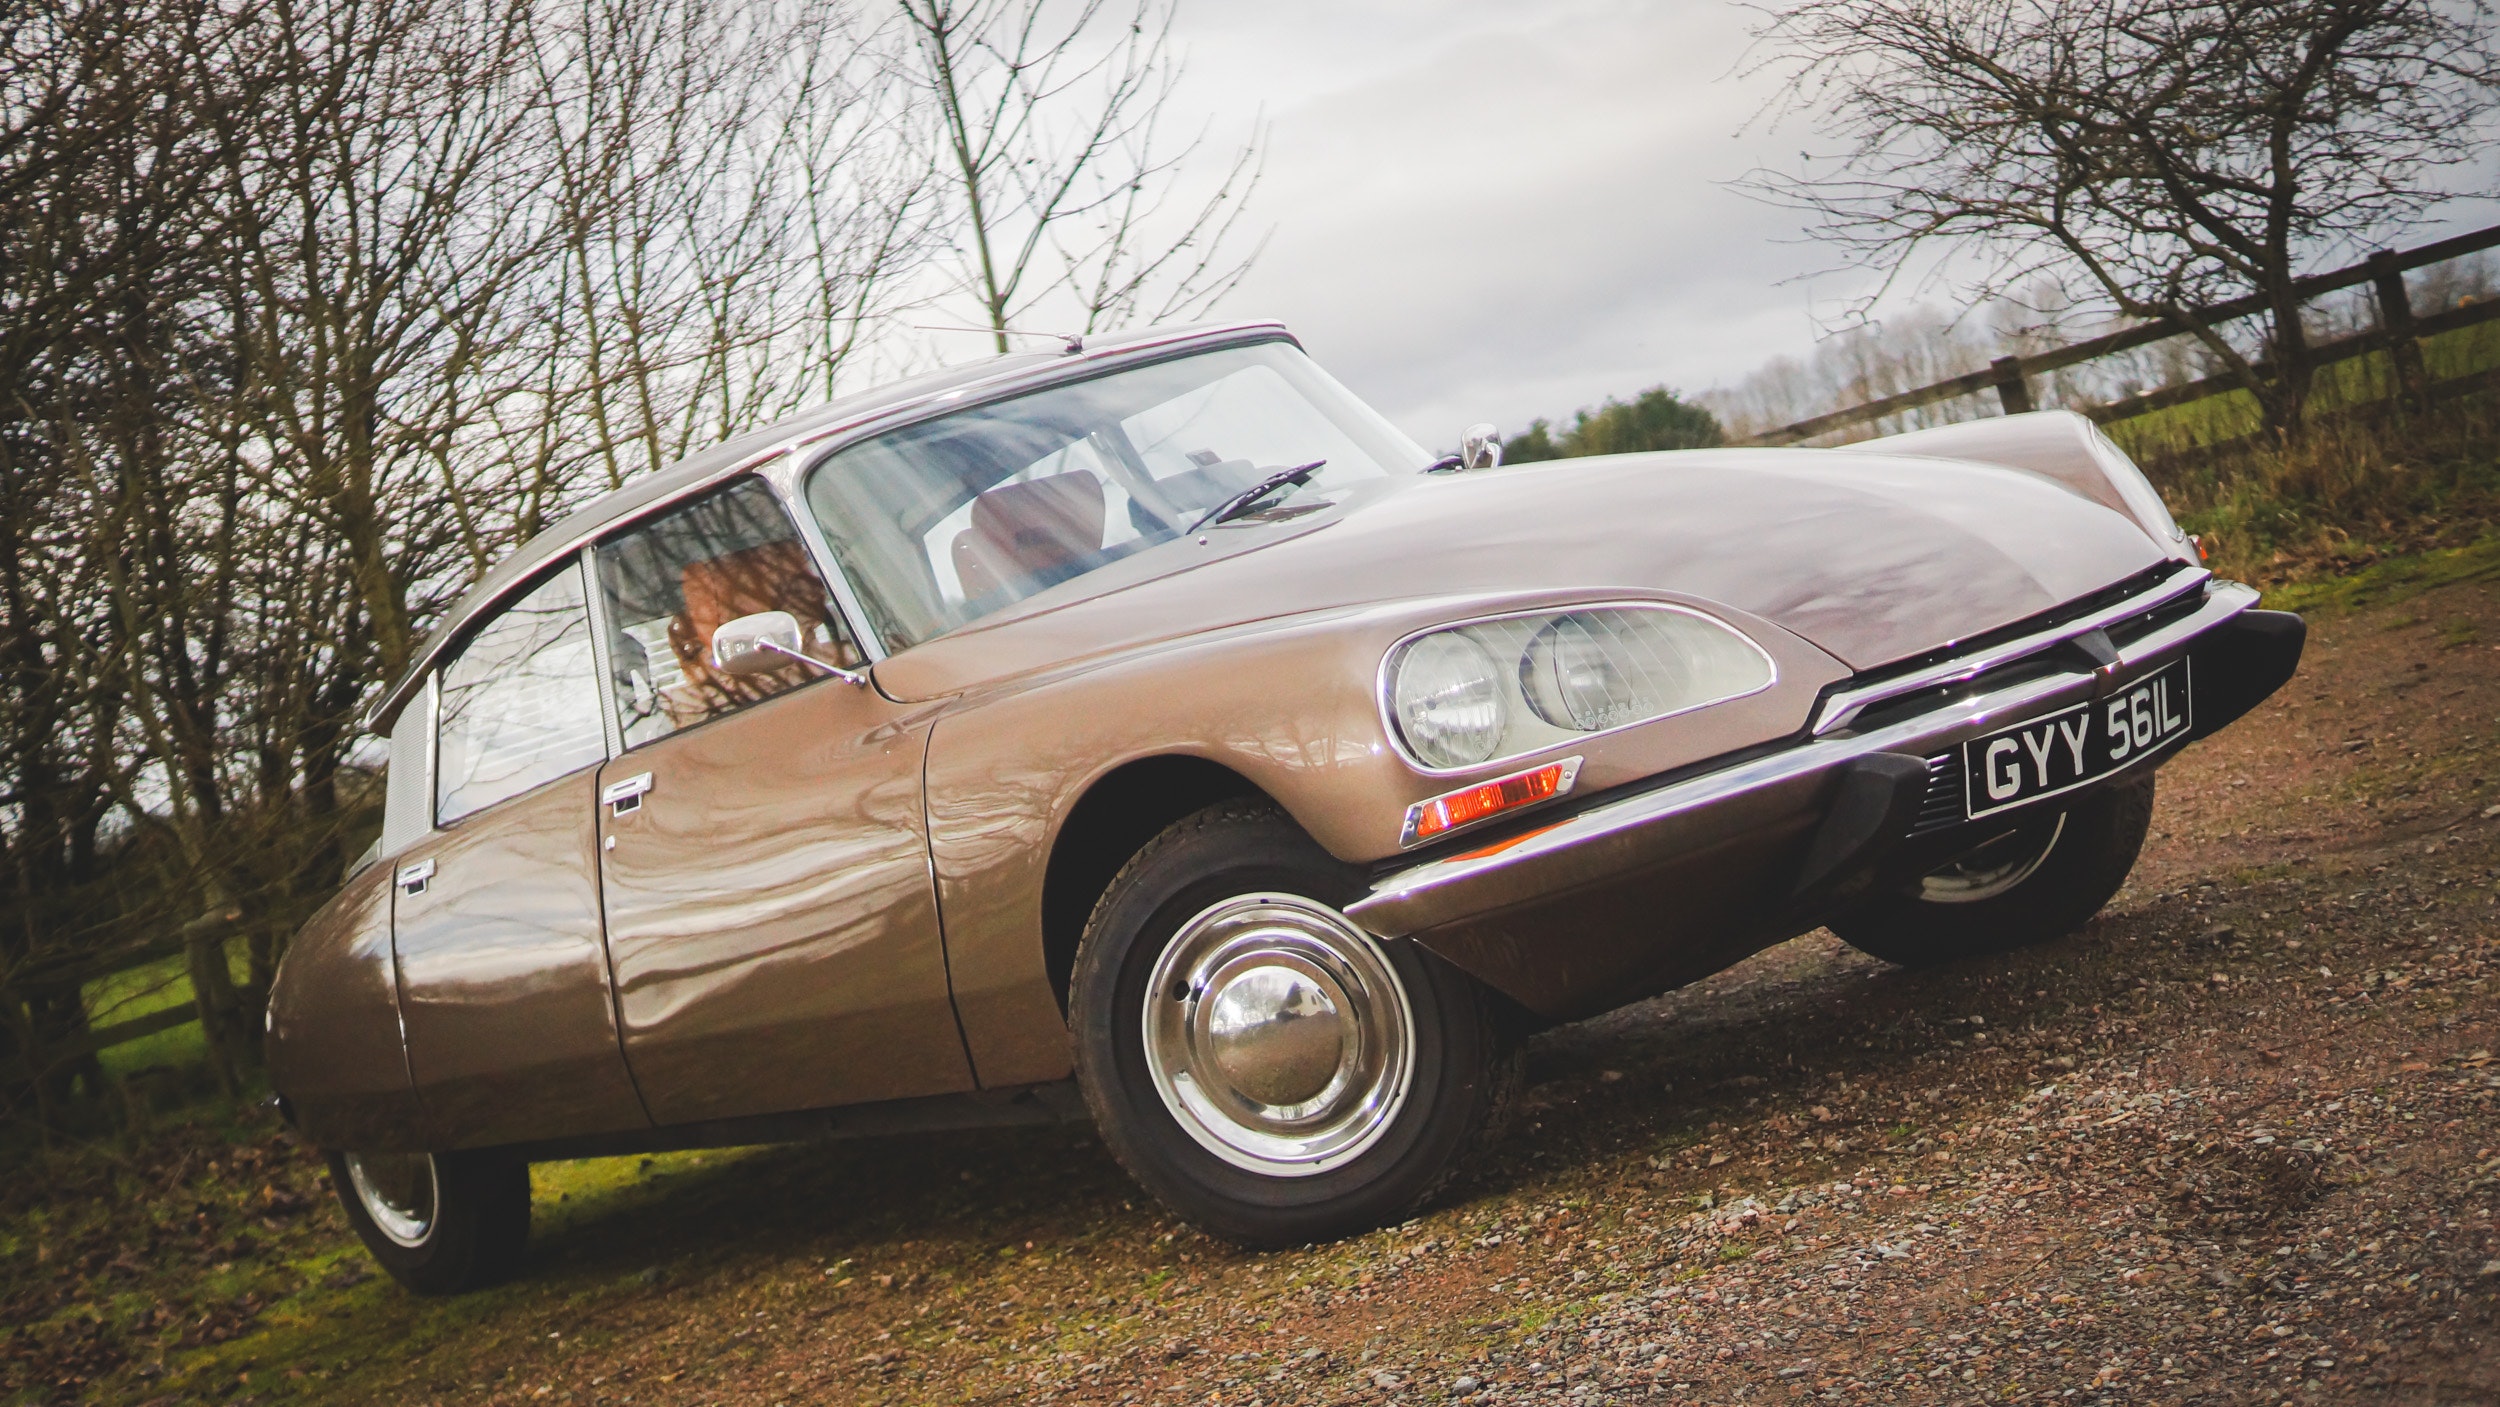 Salvage Hunters Citroën DS hits the market